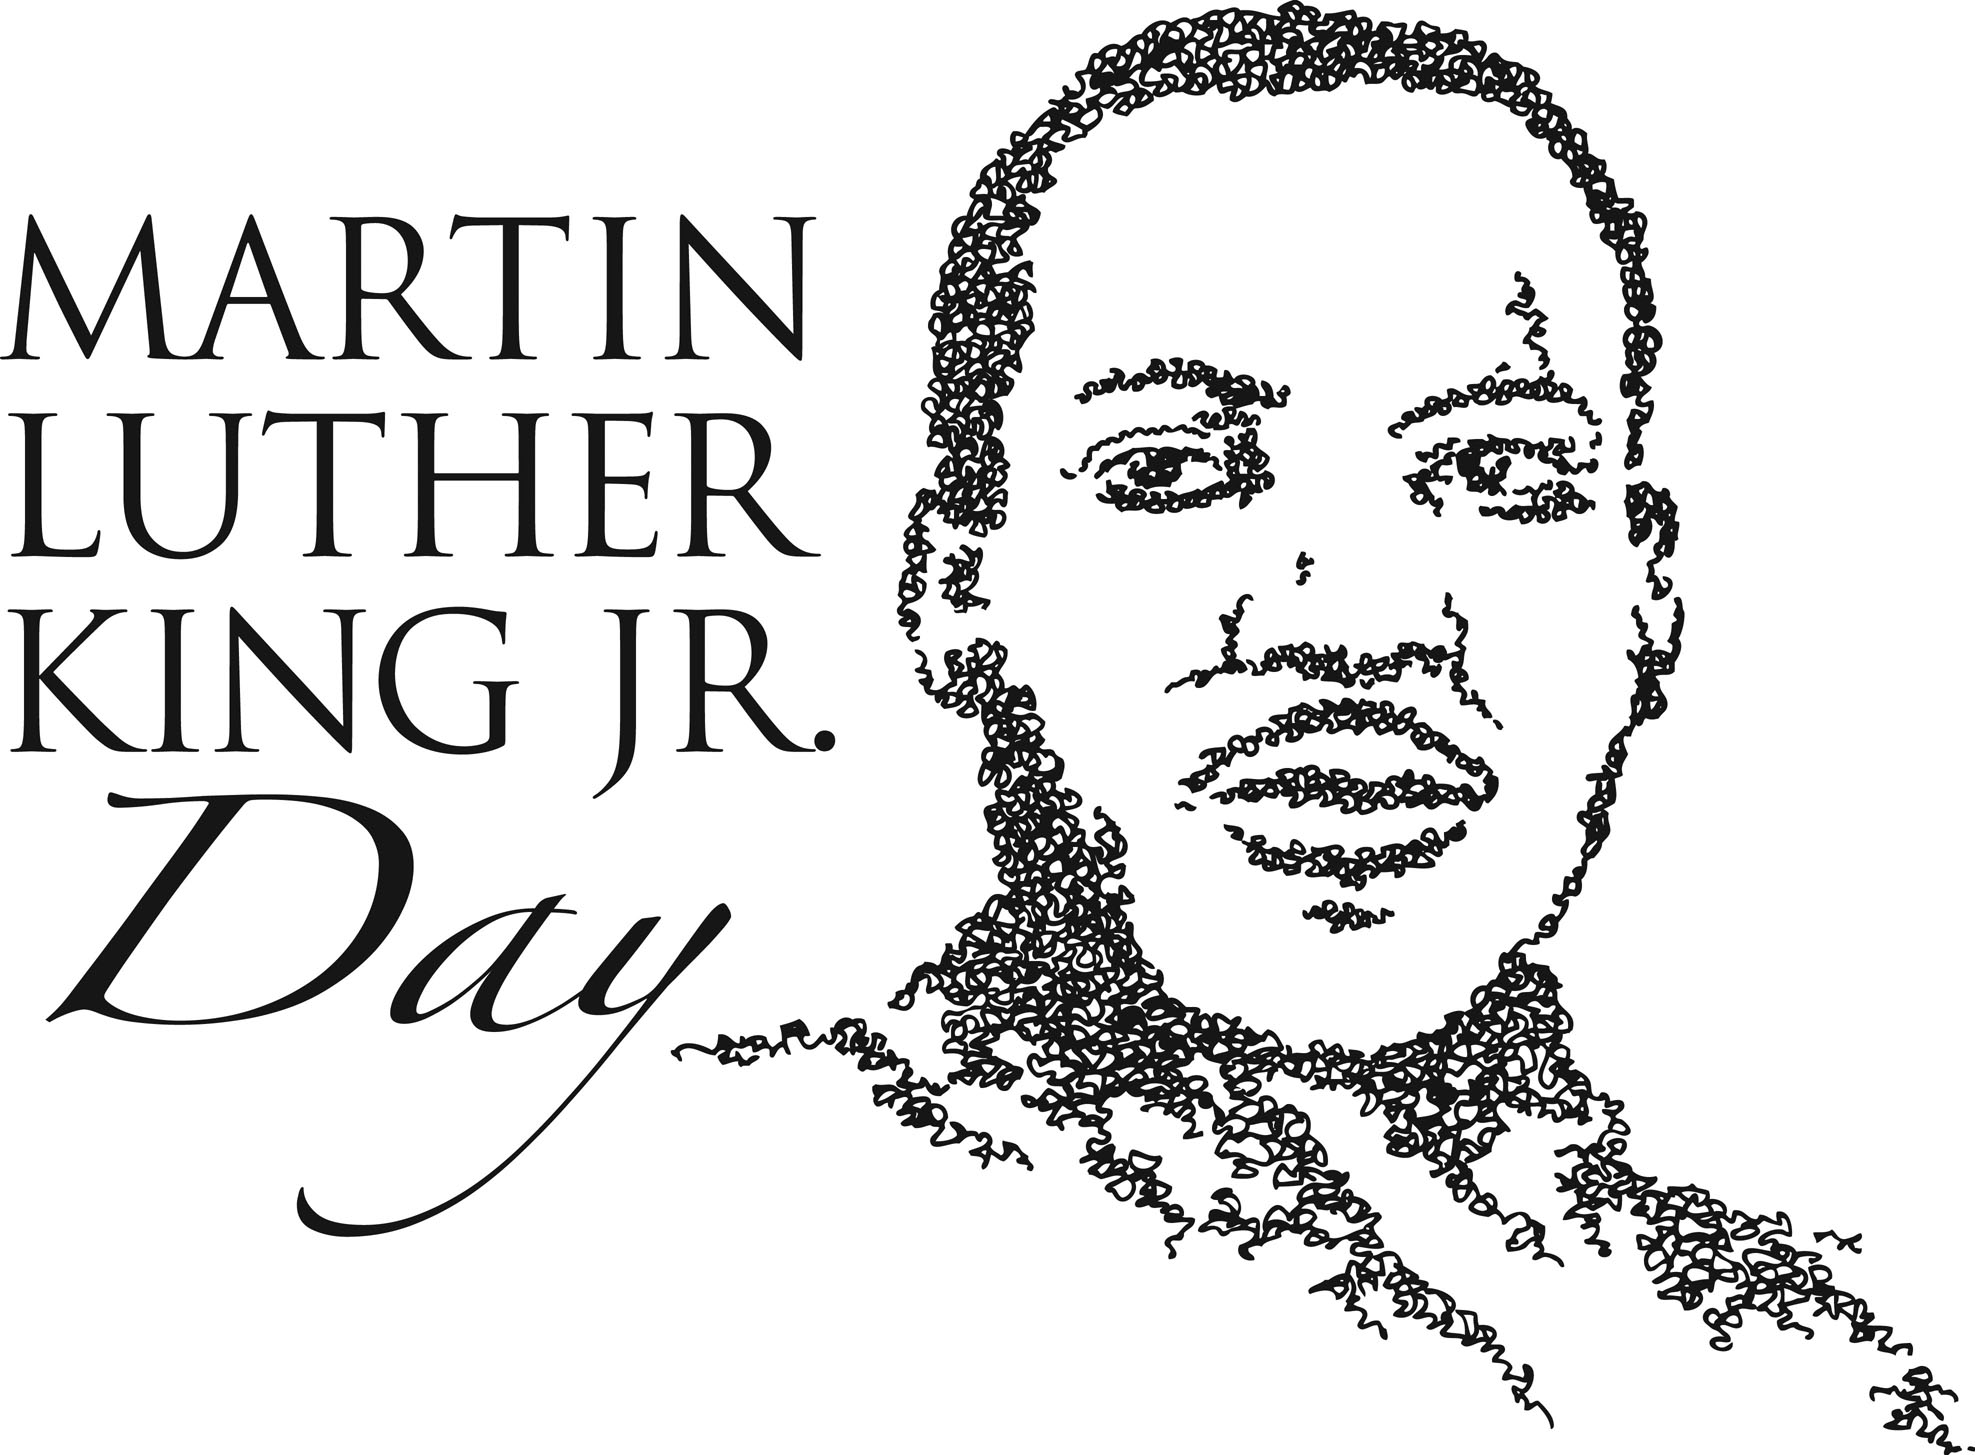 Martin Luther King Jr. Day - NO SCHOOL